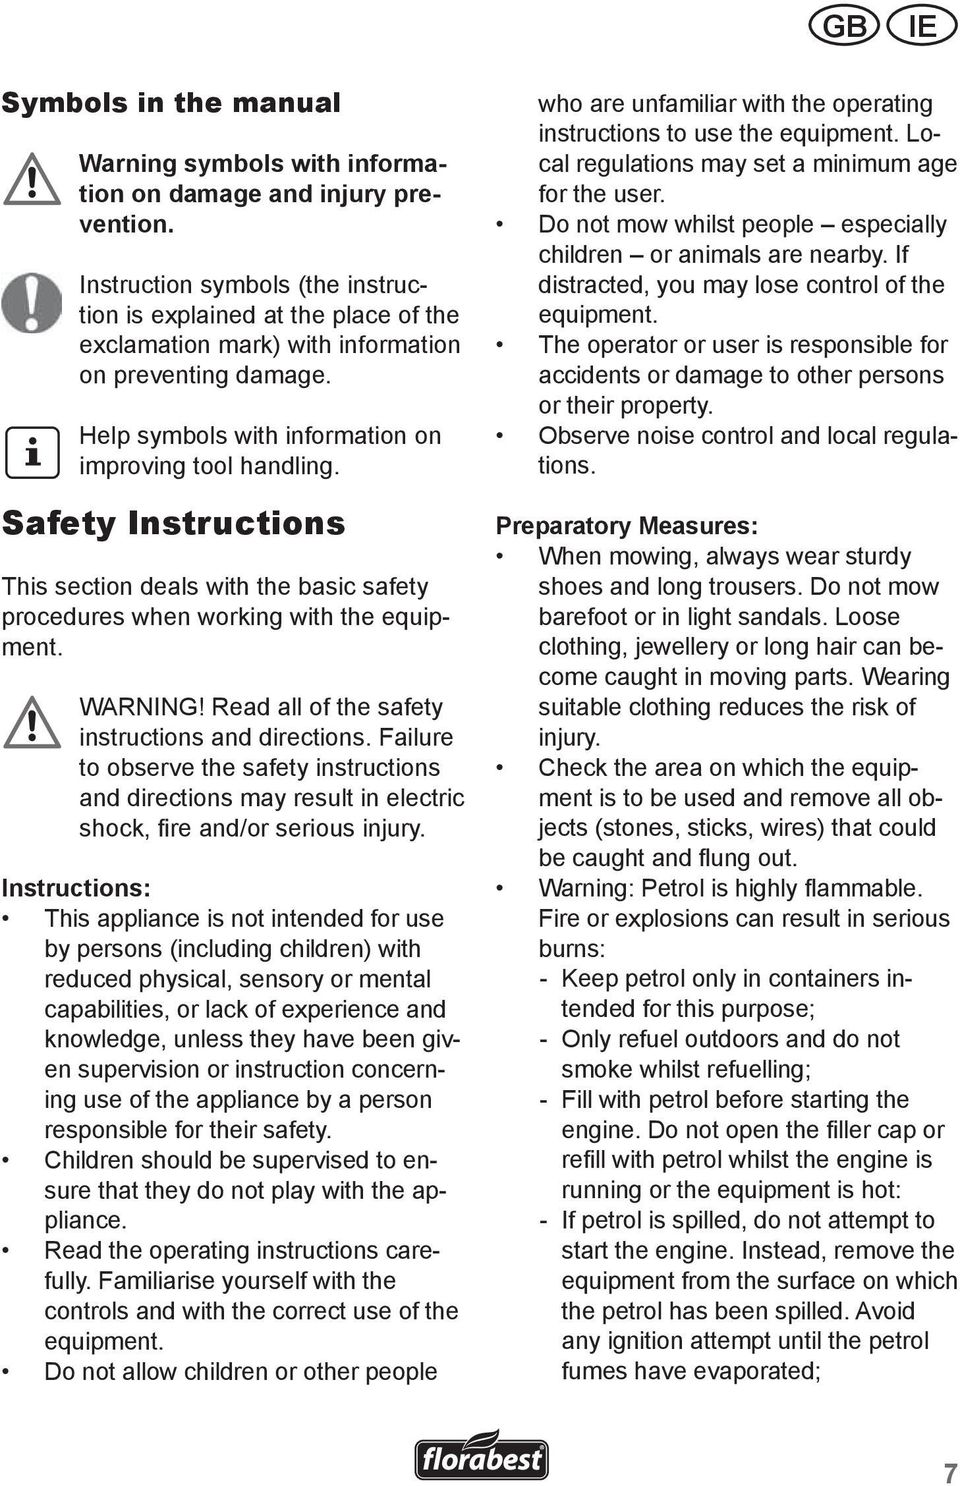 Safety Instructions This section deals with the basic safety procedures when working with the equipment. WARNING! Read all of the safety instructions and directions.